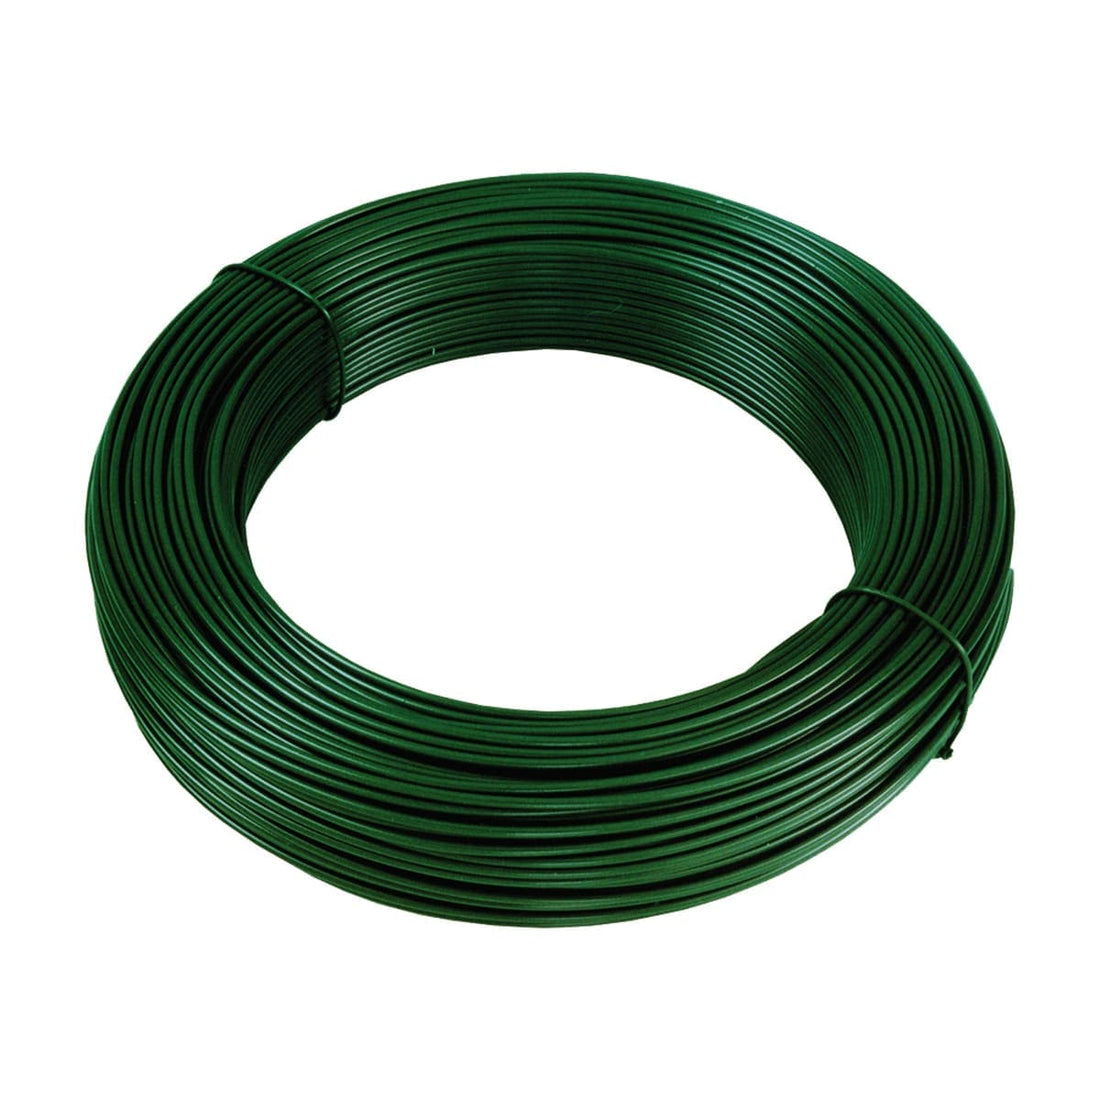 PLASTIC-COATED METAL WIRE SP. 3,1 MM 100 M GREEN - best price from Maltashopper.com BR500004667